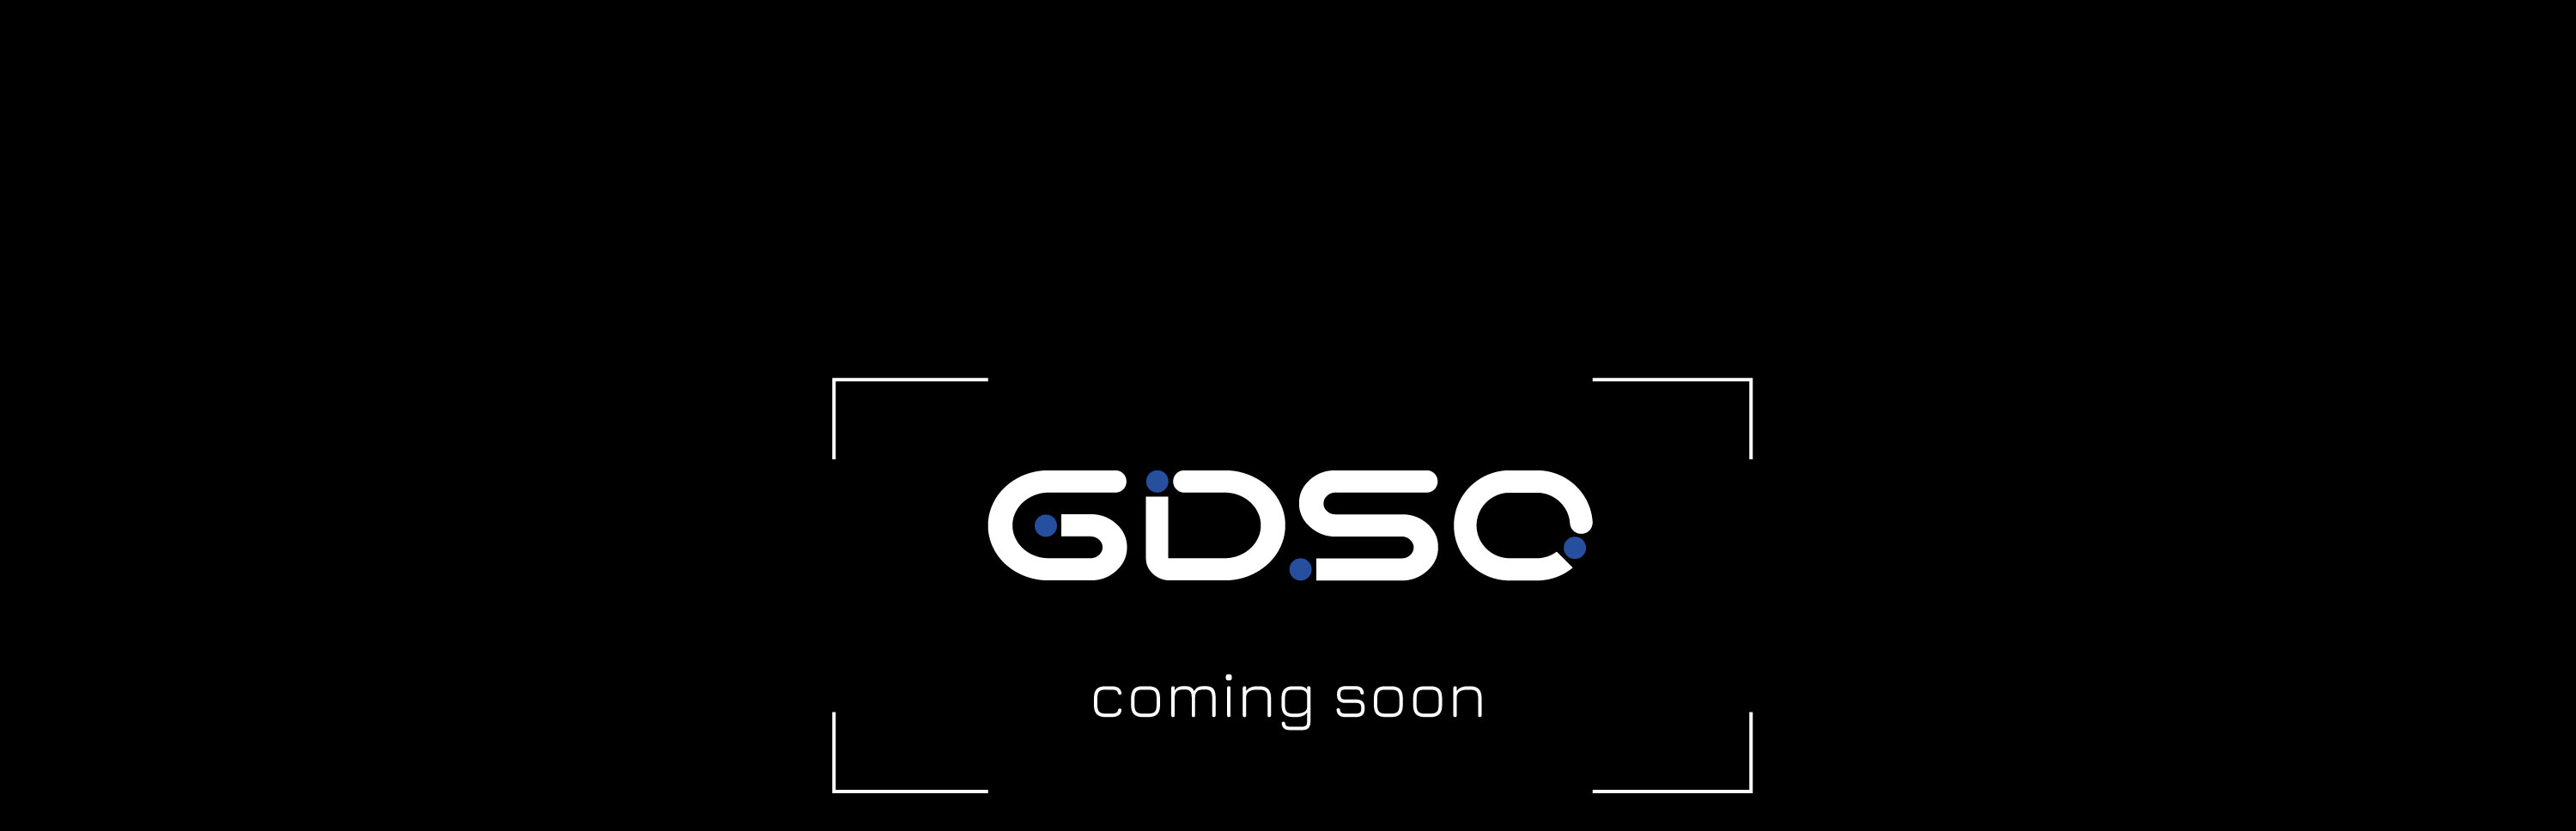 GDSO - coming soon